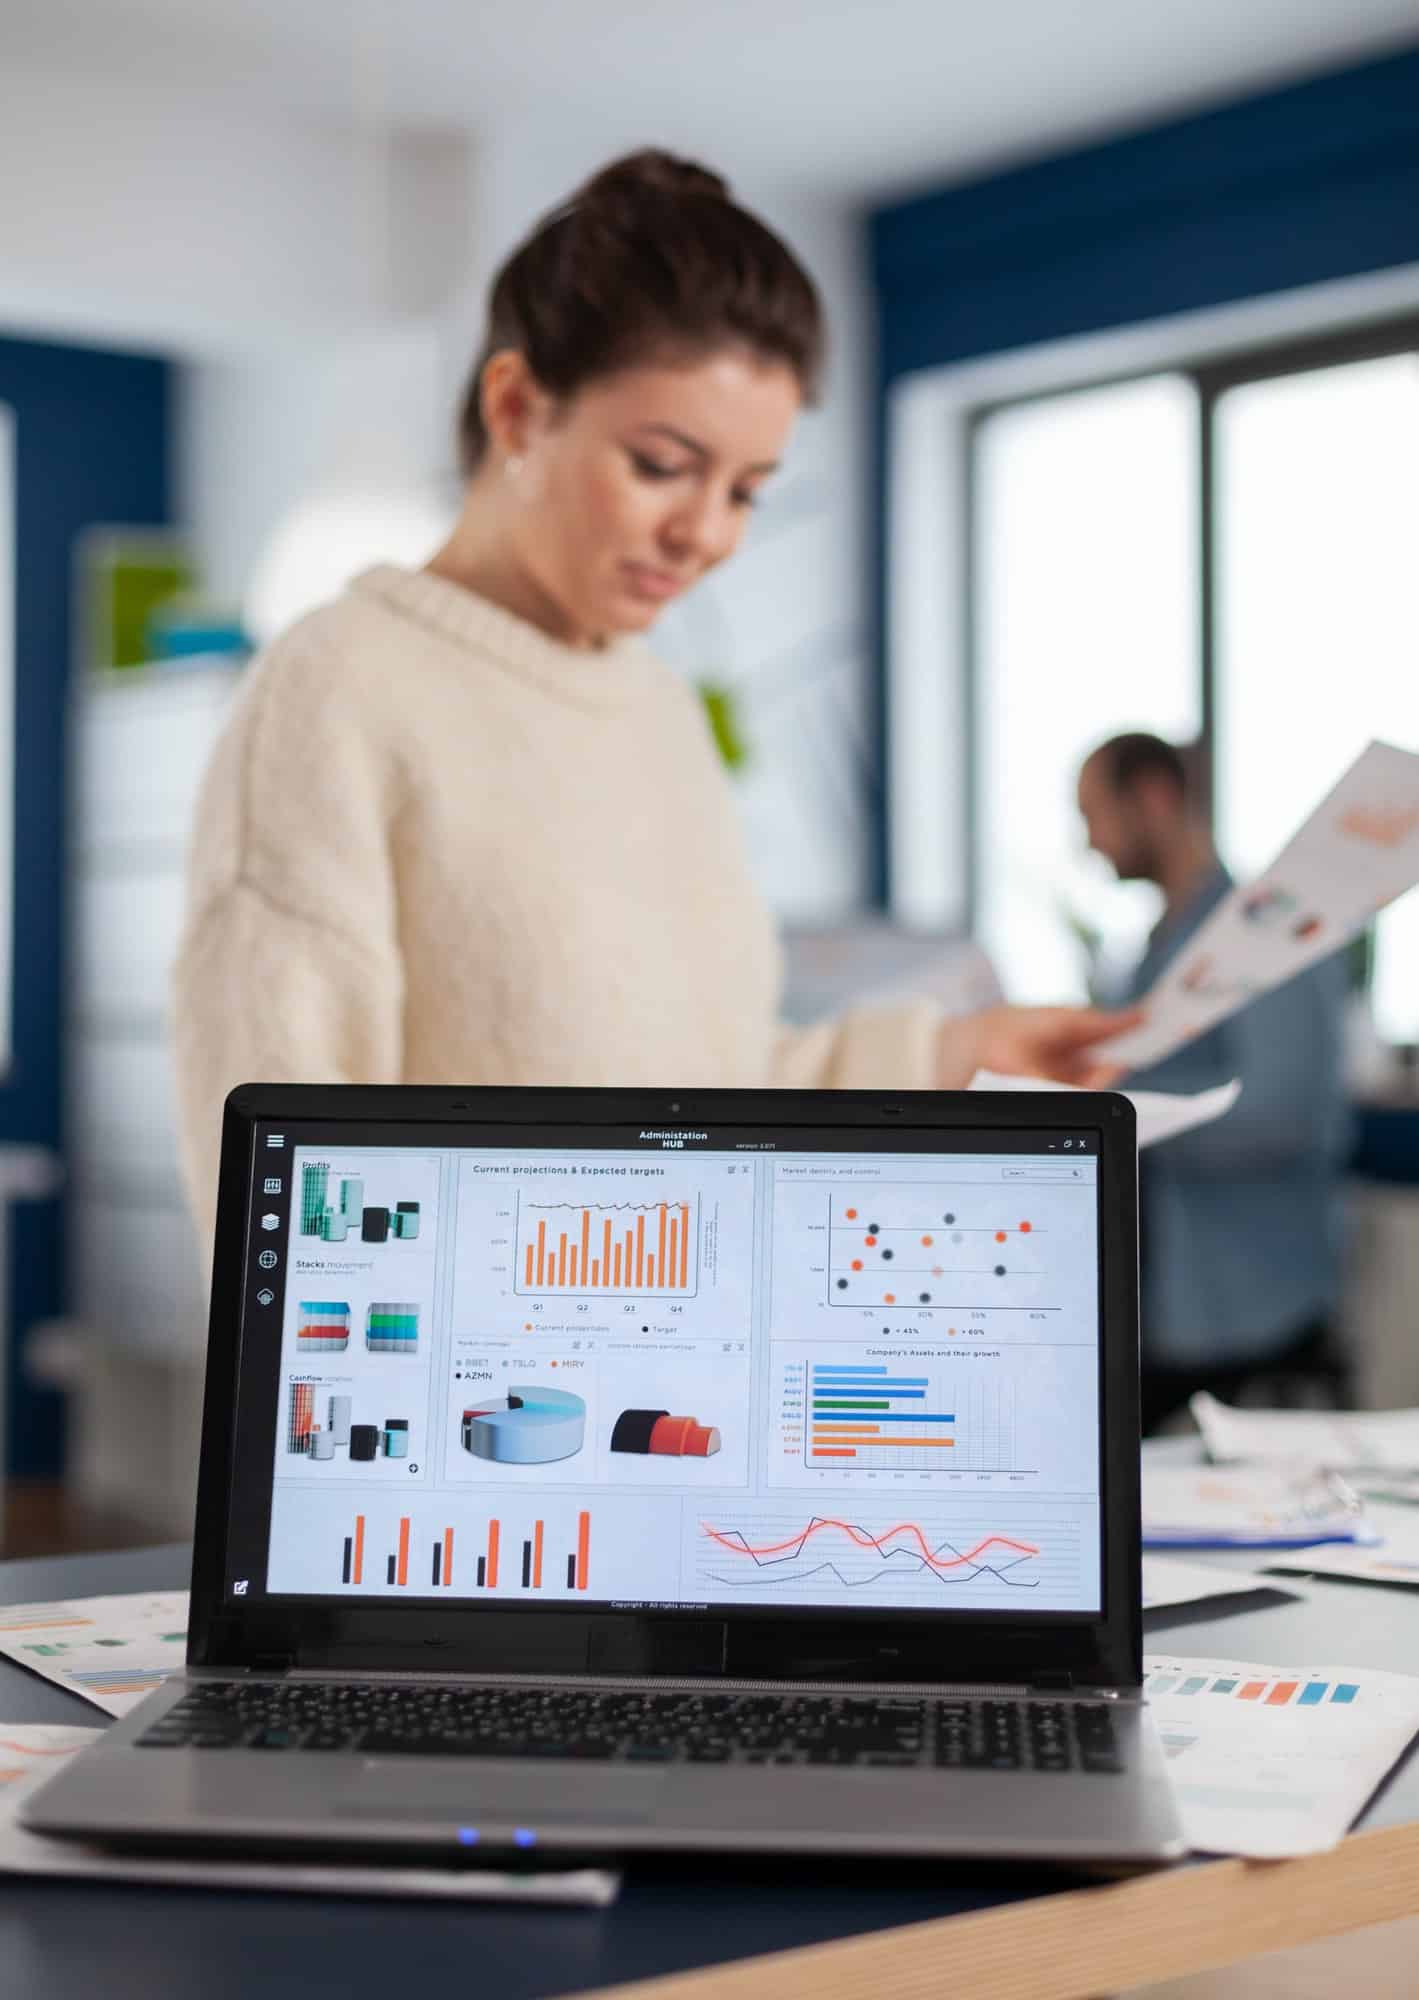 Image of an open laptop on a desk with a woman in the background on Softlinx' website